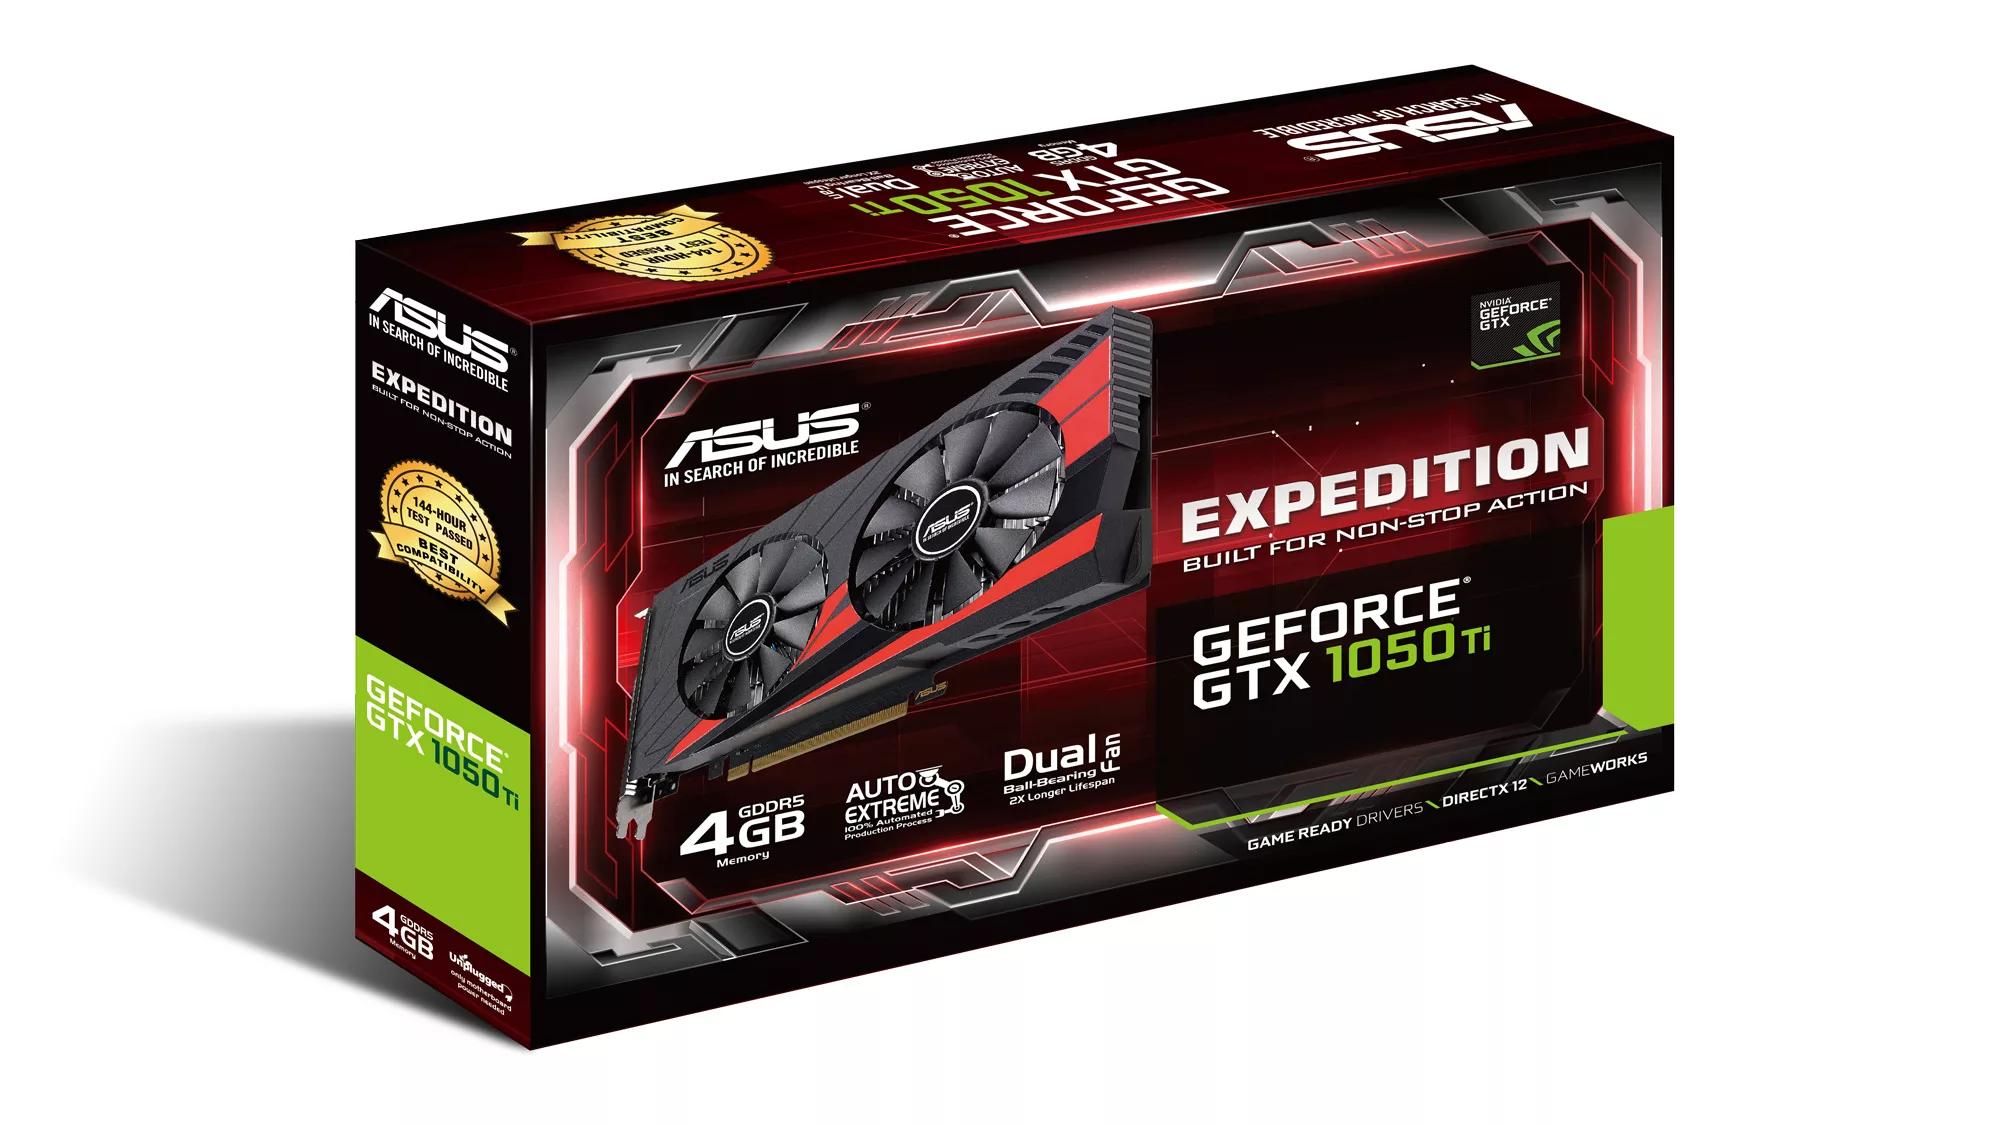 ASUS Expedition GTX 1050 Ti | ROG - Republic of Gamers Global